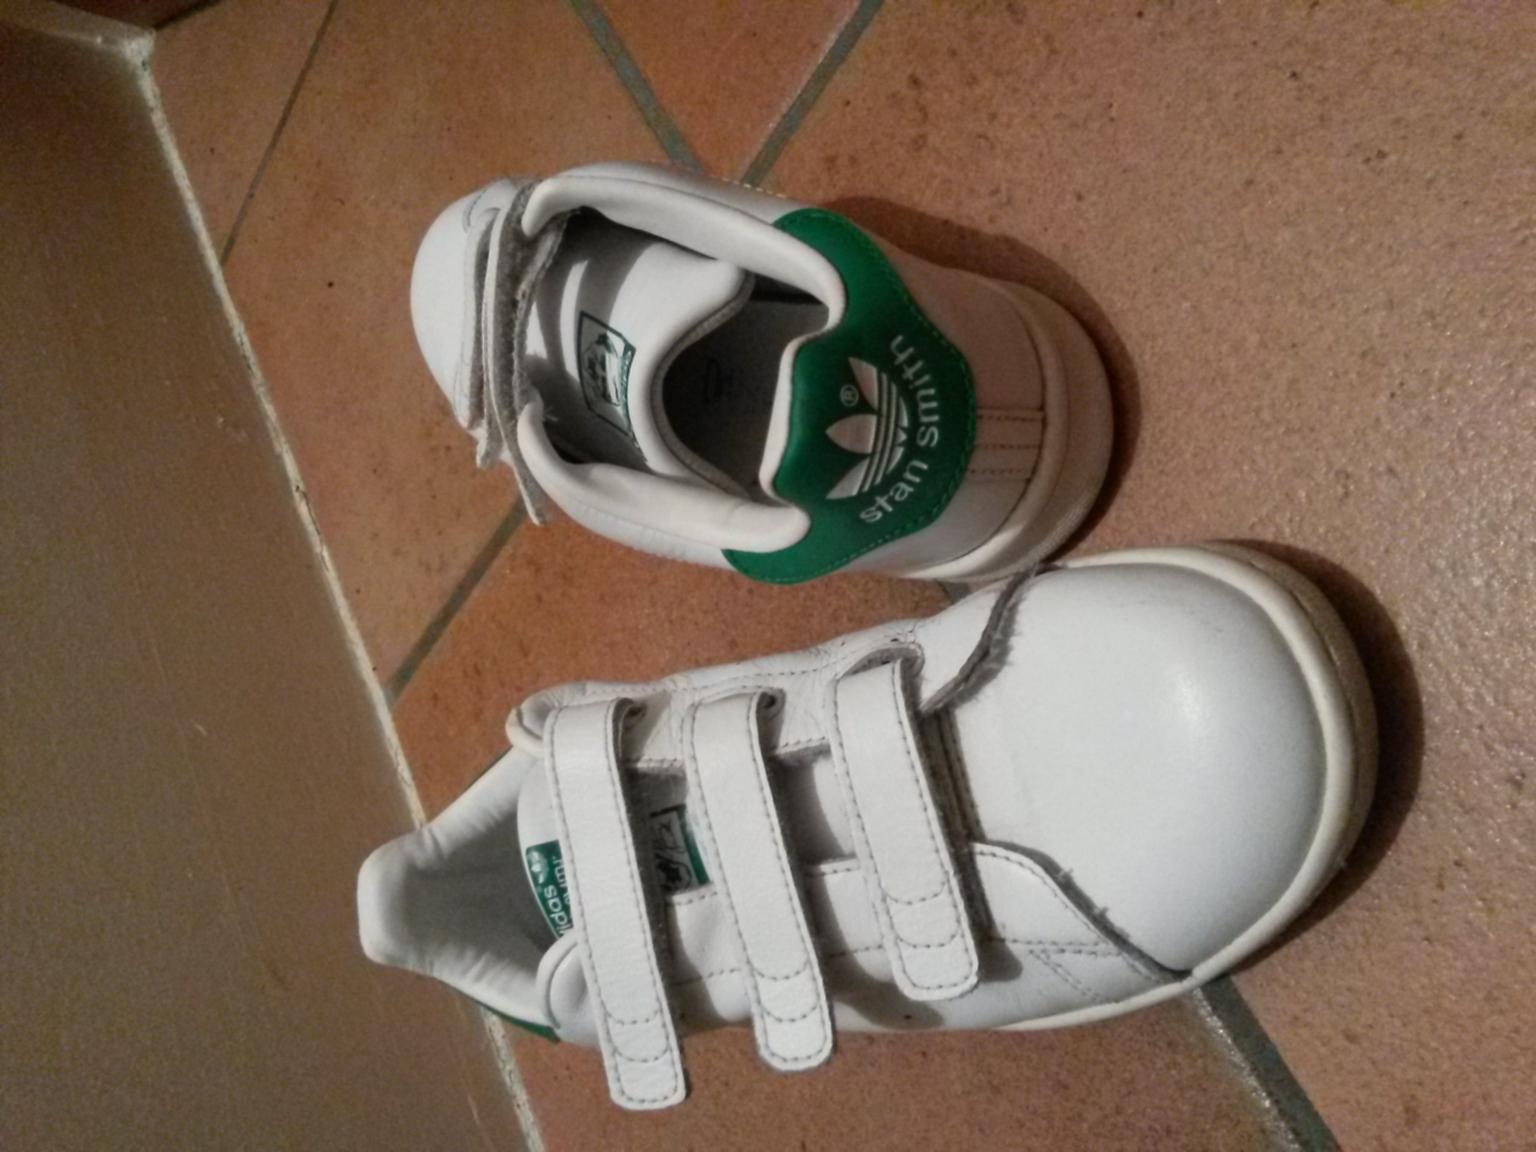 ADIDAS Stan Smith Kids Original nr. 35 in 21052 Busto Arsizio for €30.00  for sale - Shpock